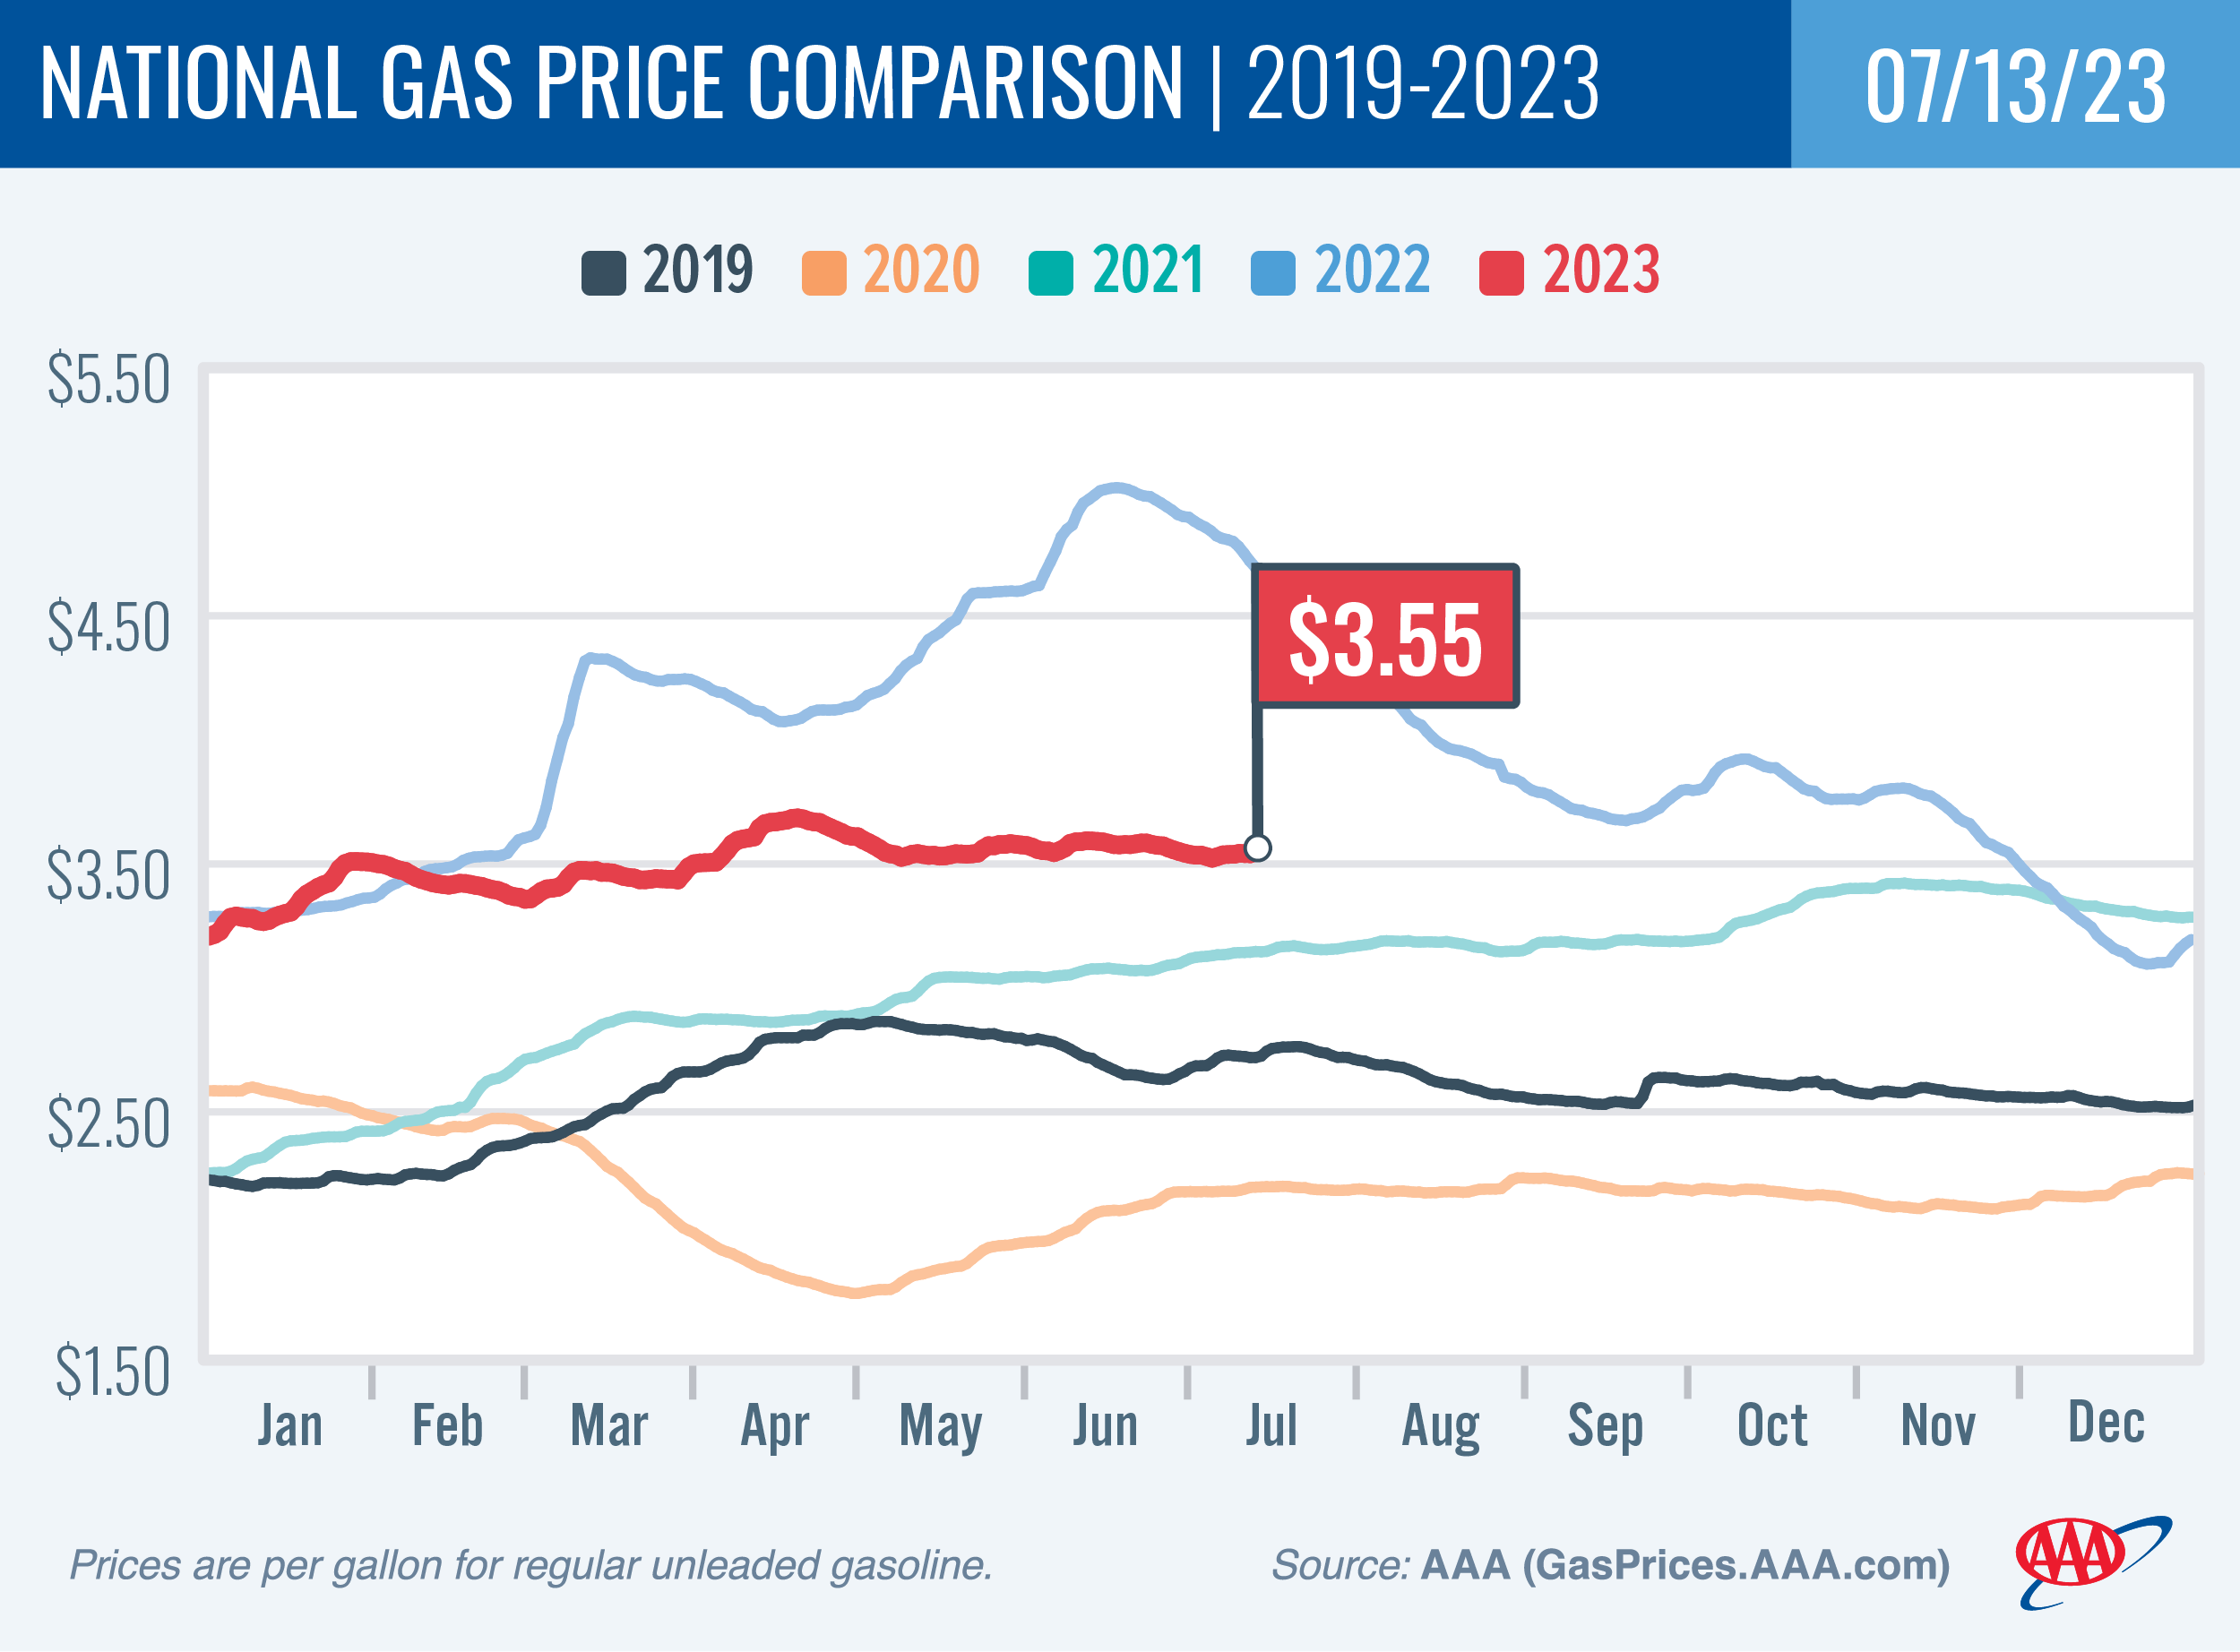 National Gas Price Comparison for July 13, 2023